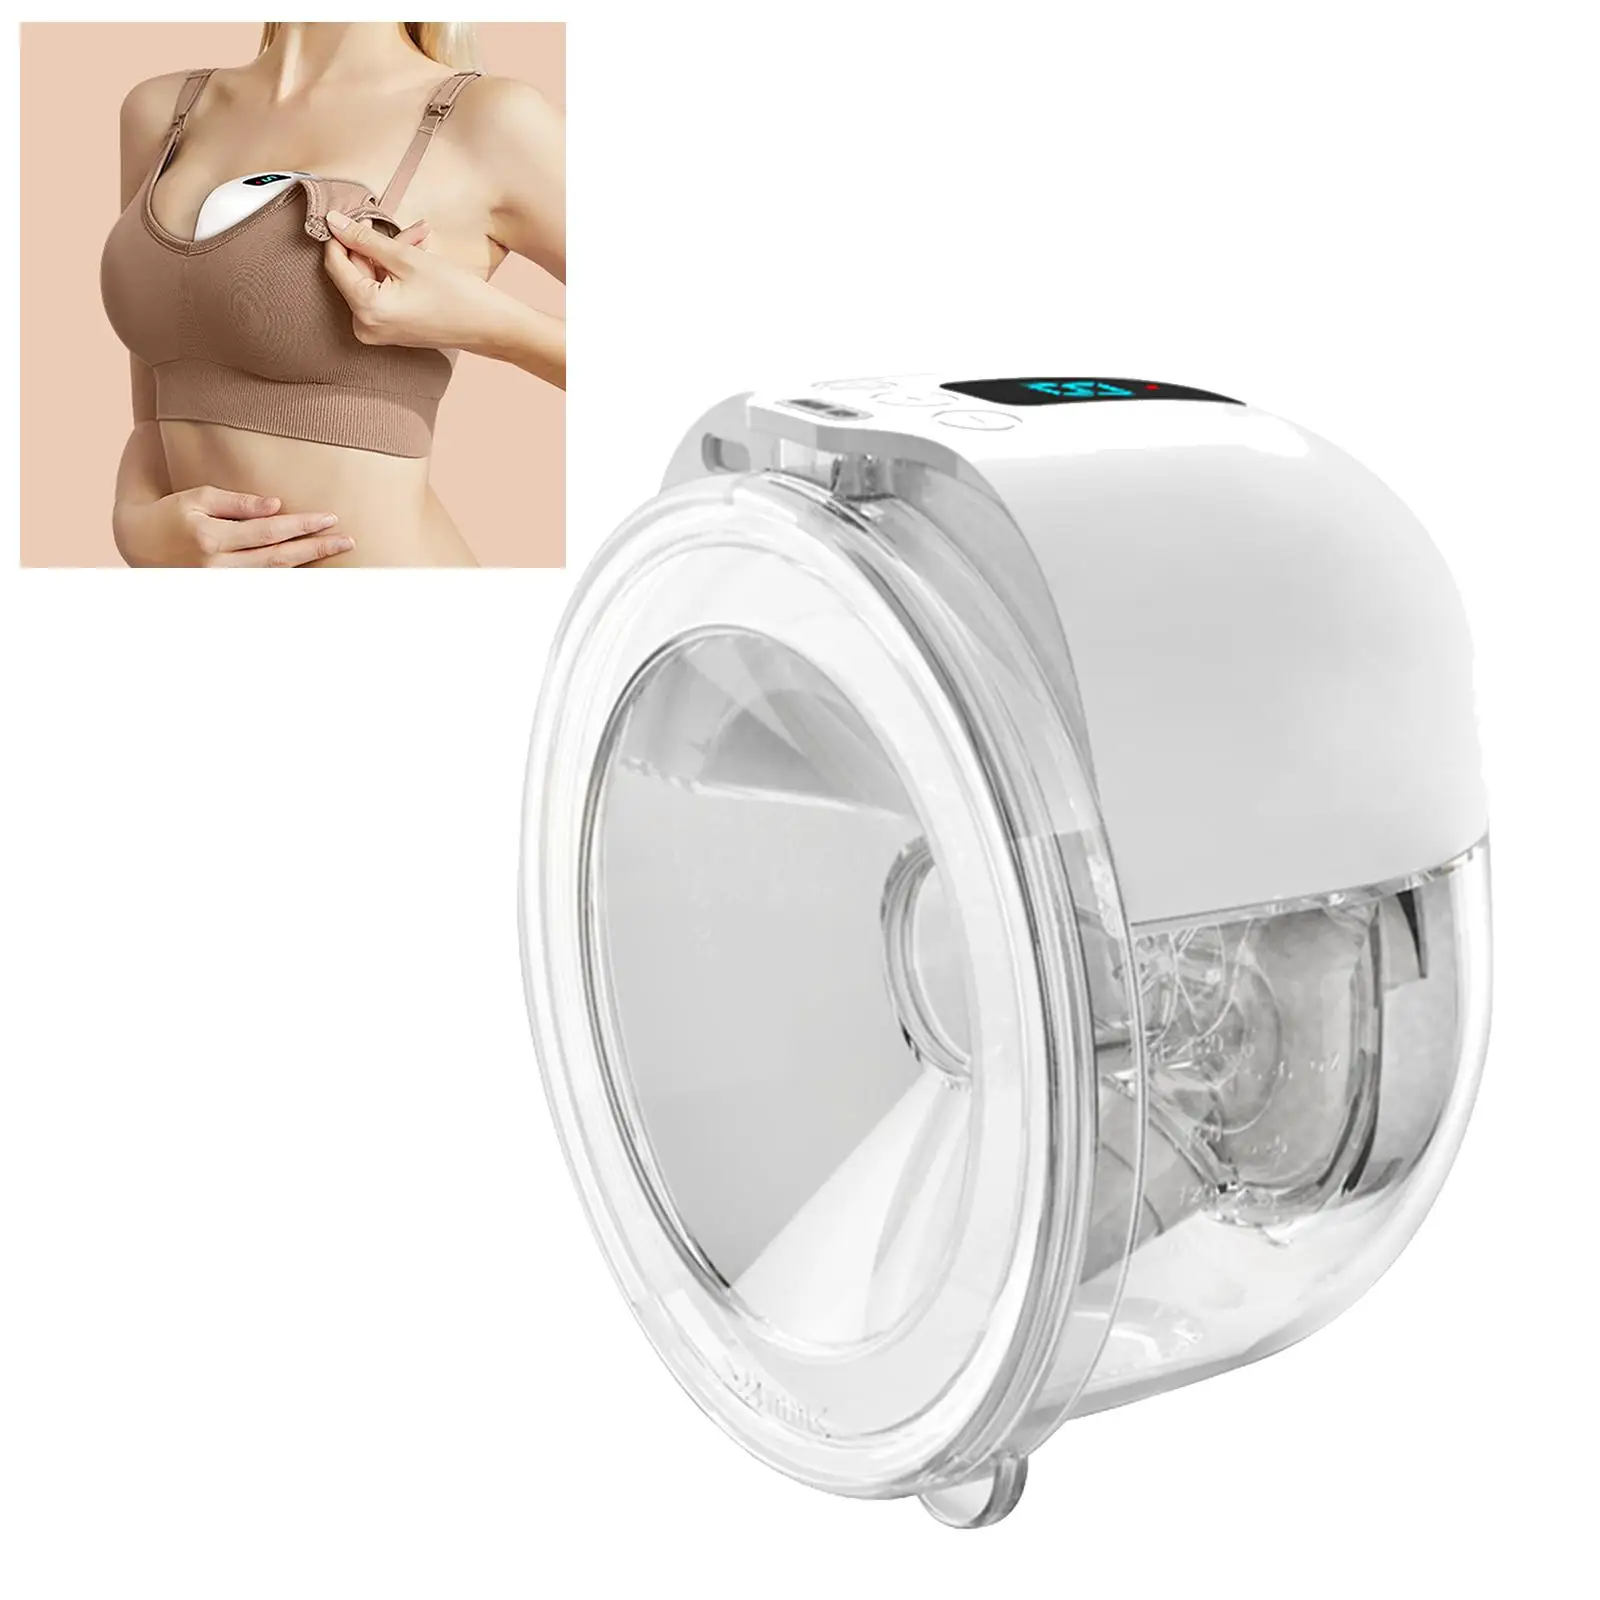 Wearable Breast Pump Milk Extractor Rechargeable 3 Modes 9 Gears Low Noise Portable Breast Pump Breastfeeding Breast Pump